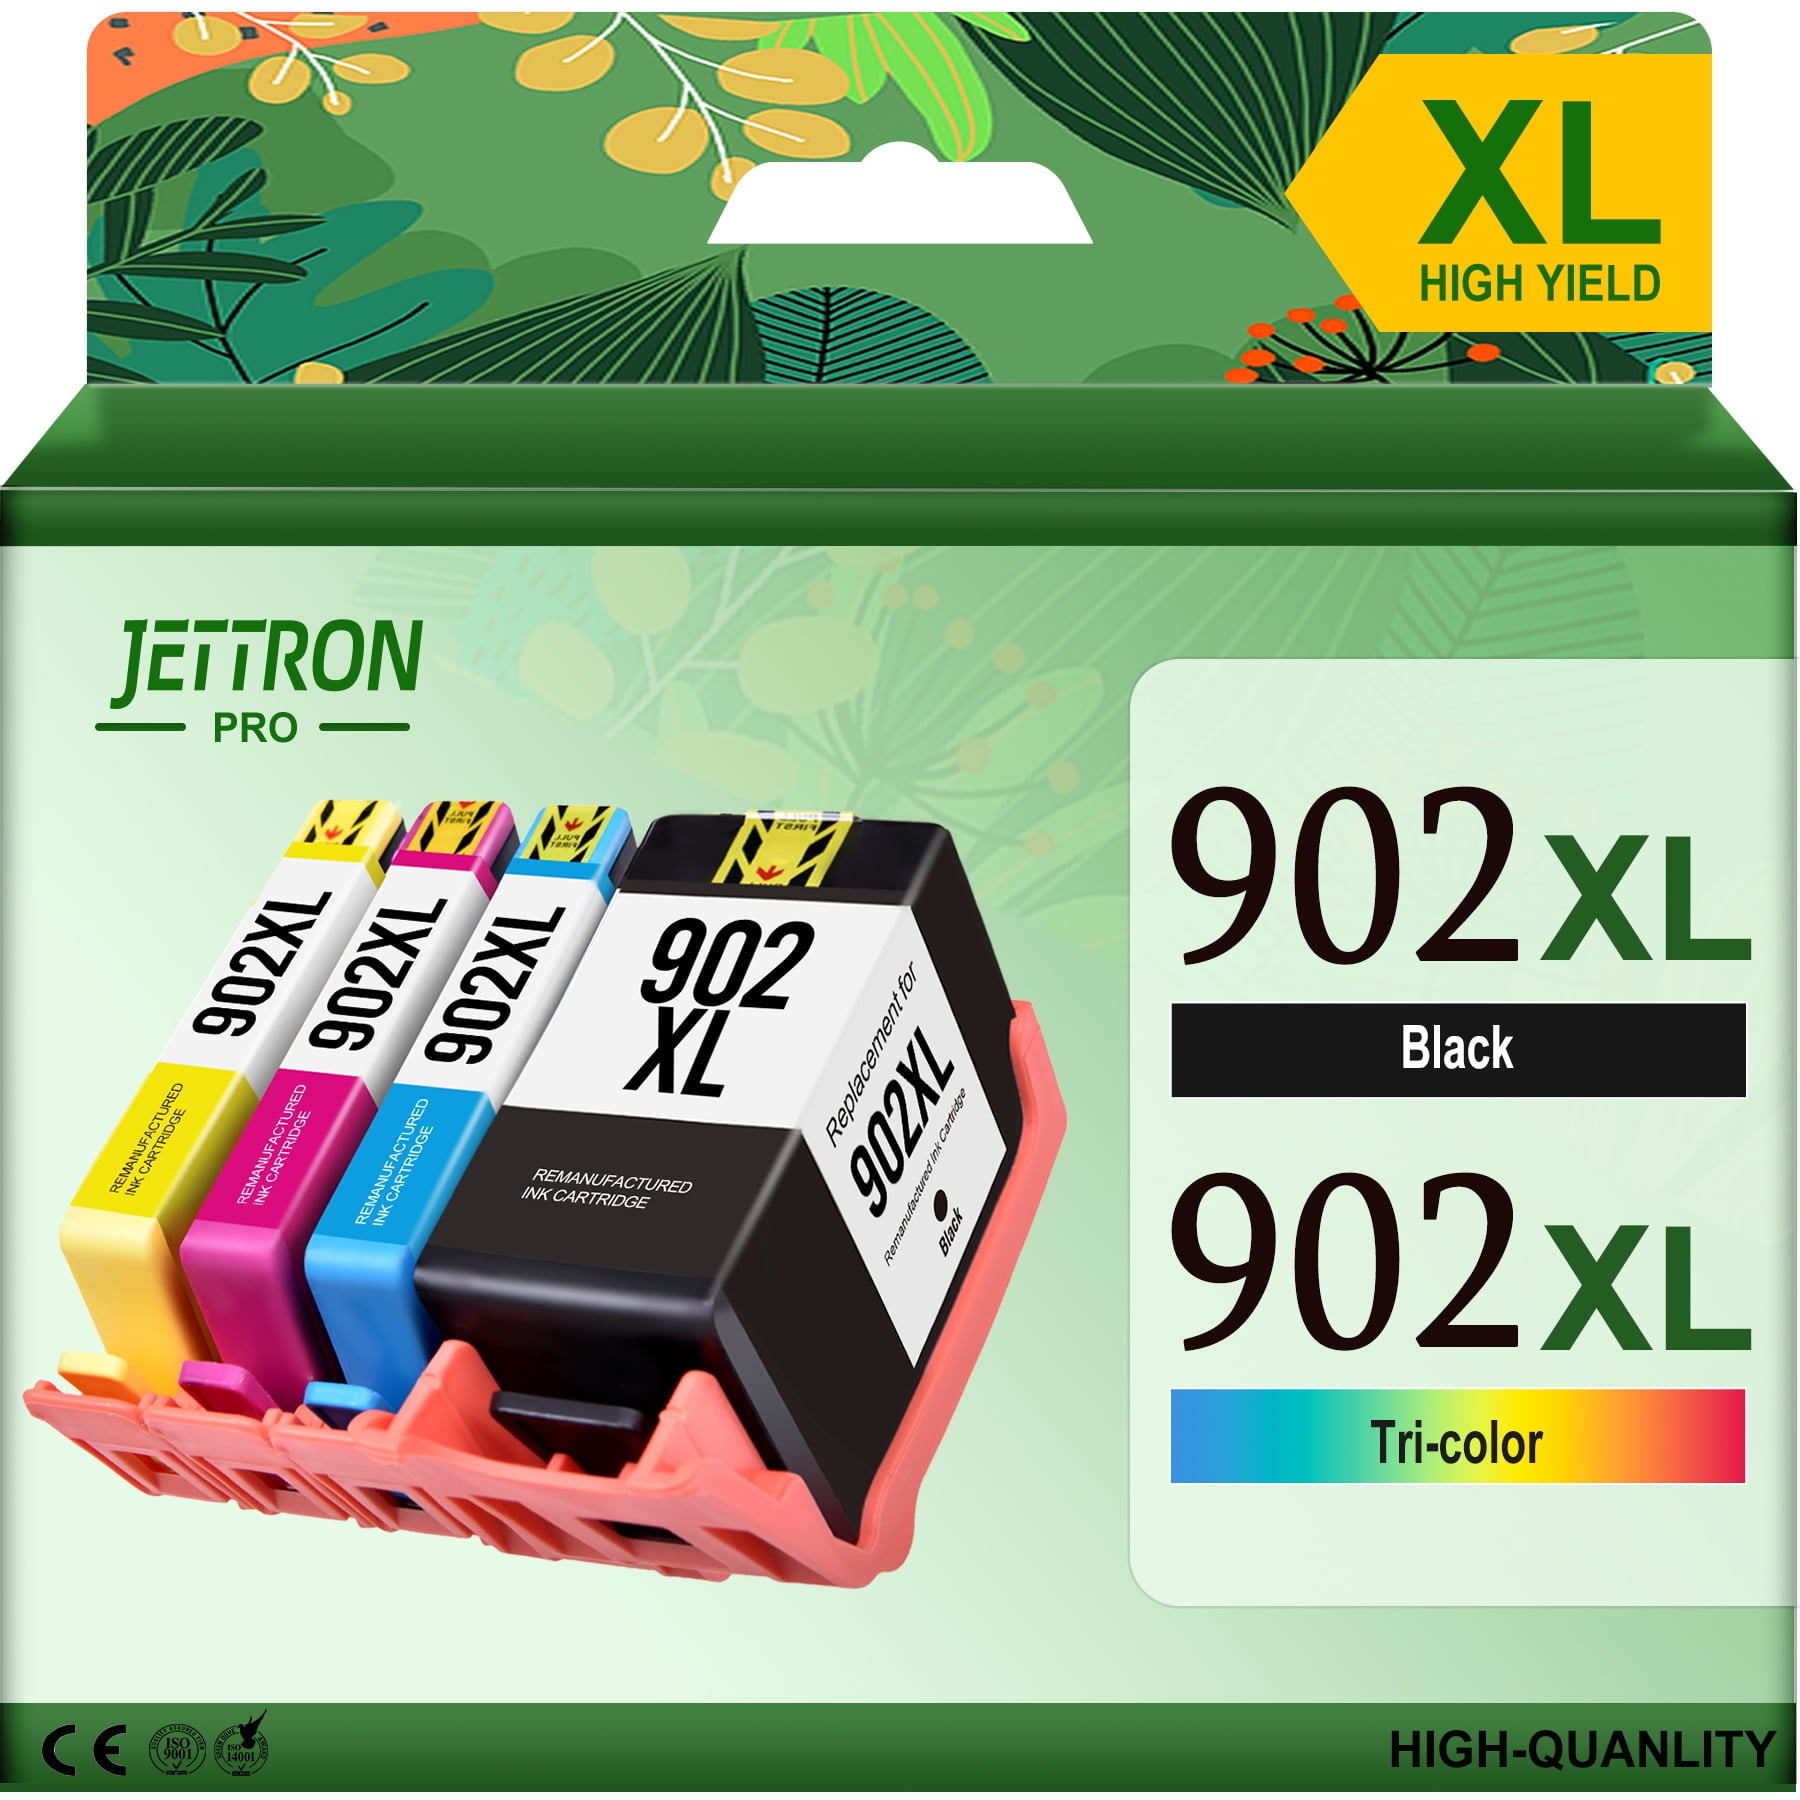 902XL Ink Cartridge for HP 902 XL Ink Cartridges Use with HP Officejet Pro  6978 6960 6958 6970 6968 6962 6975 6950 6954 Printer  (Blakc,Cyan,Magenta,Yellow) 